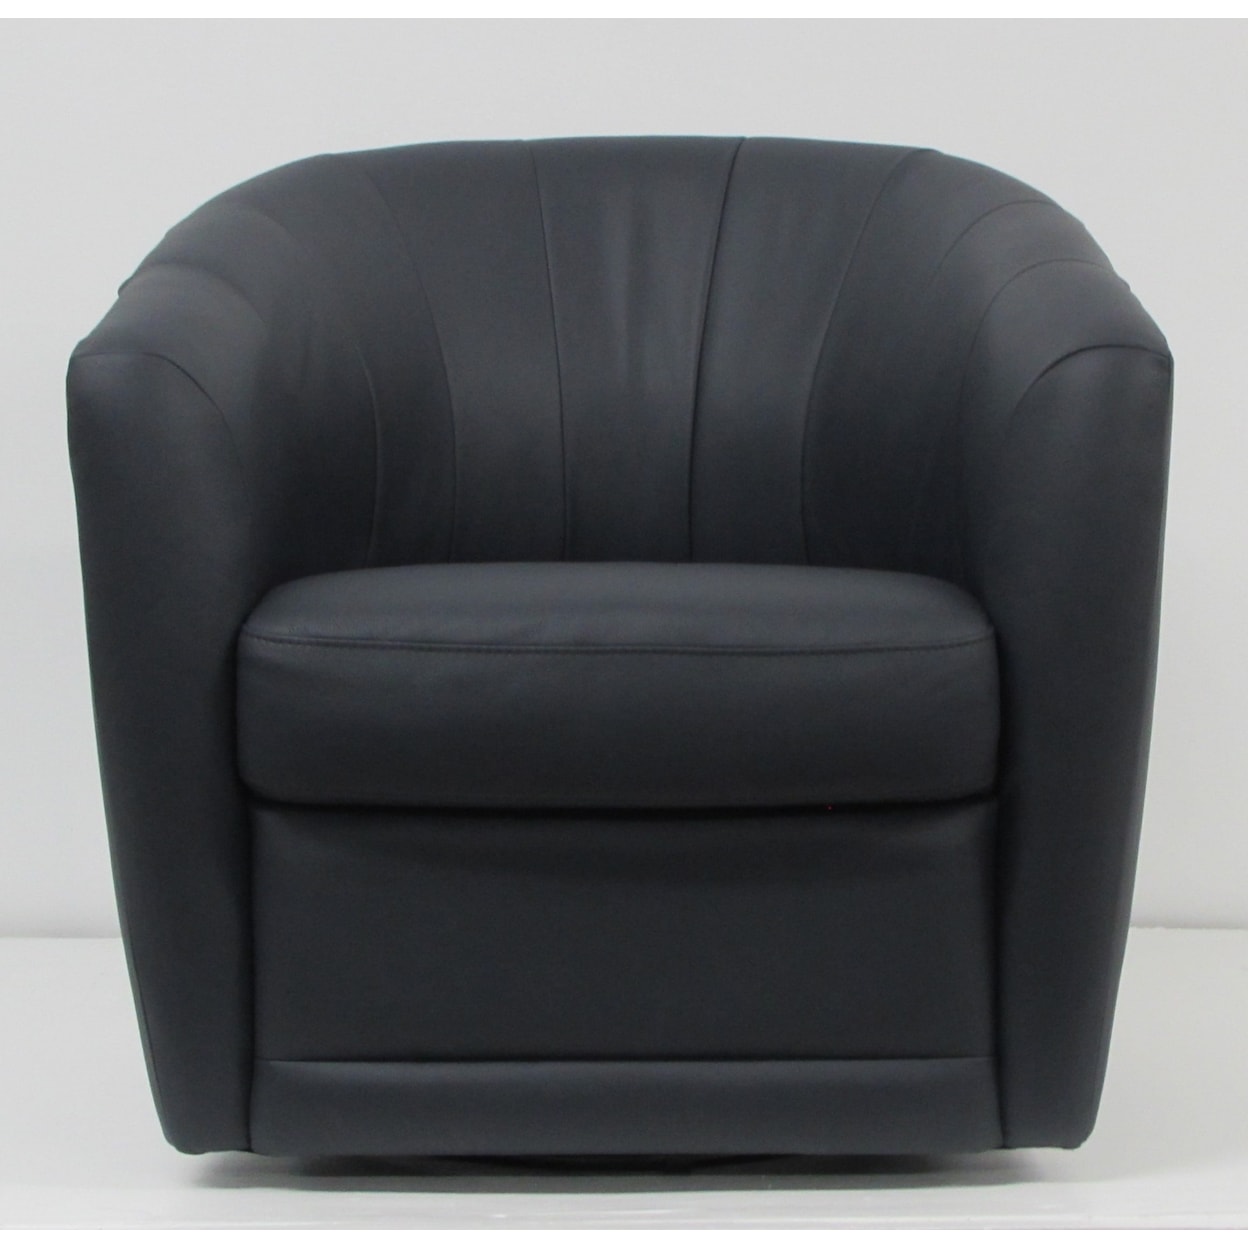 Natuzzi Editions C274 Leather Collection Navy Leather Swivel Chair